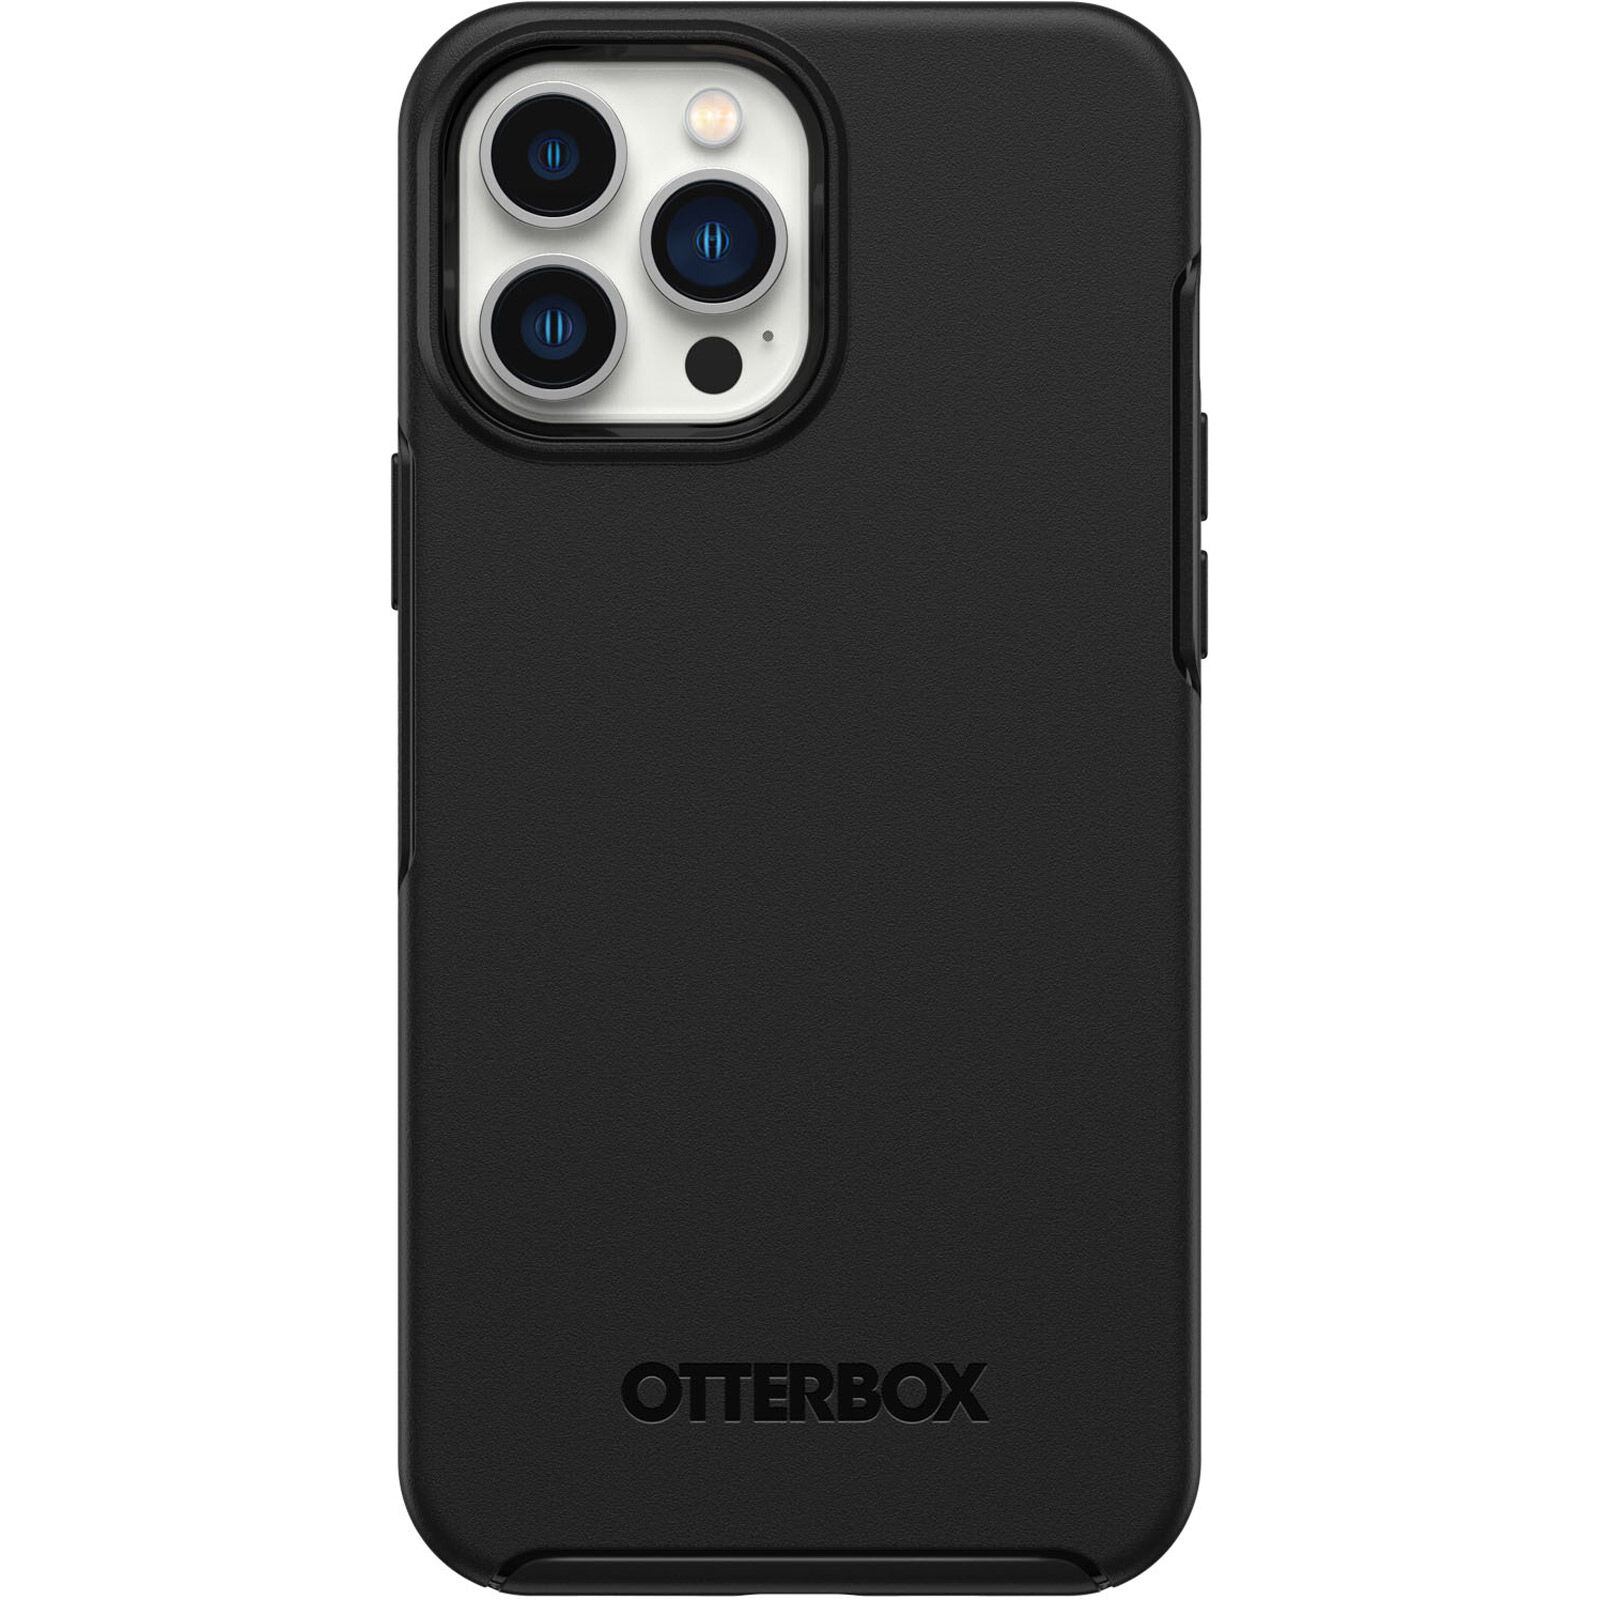 iPhone 12 Pro Max cases from OtterBox